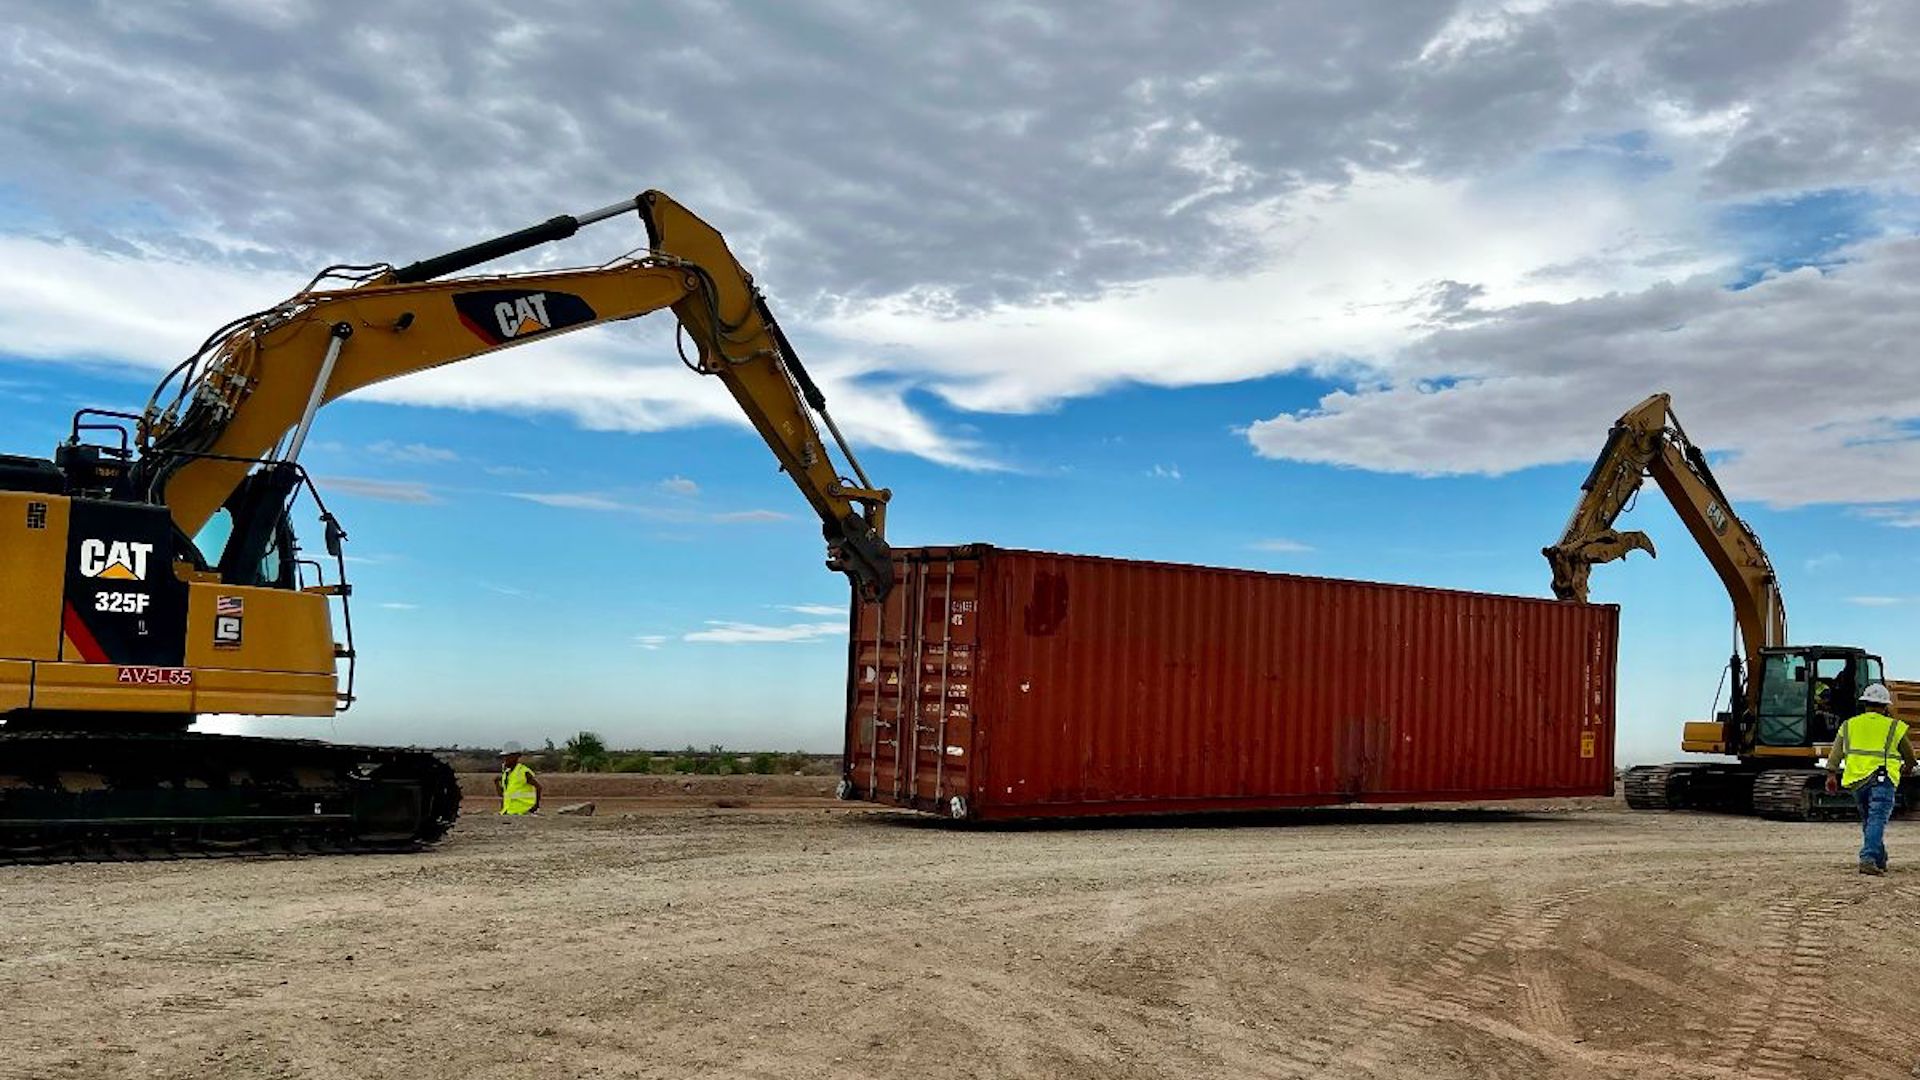 Gov. Doug Ducey's office said Friday, August 12, 2022 that he directed crews to use shipping containers to close a gap in the U.S.-Mexico border.